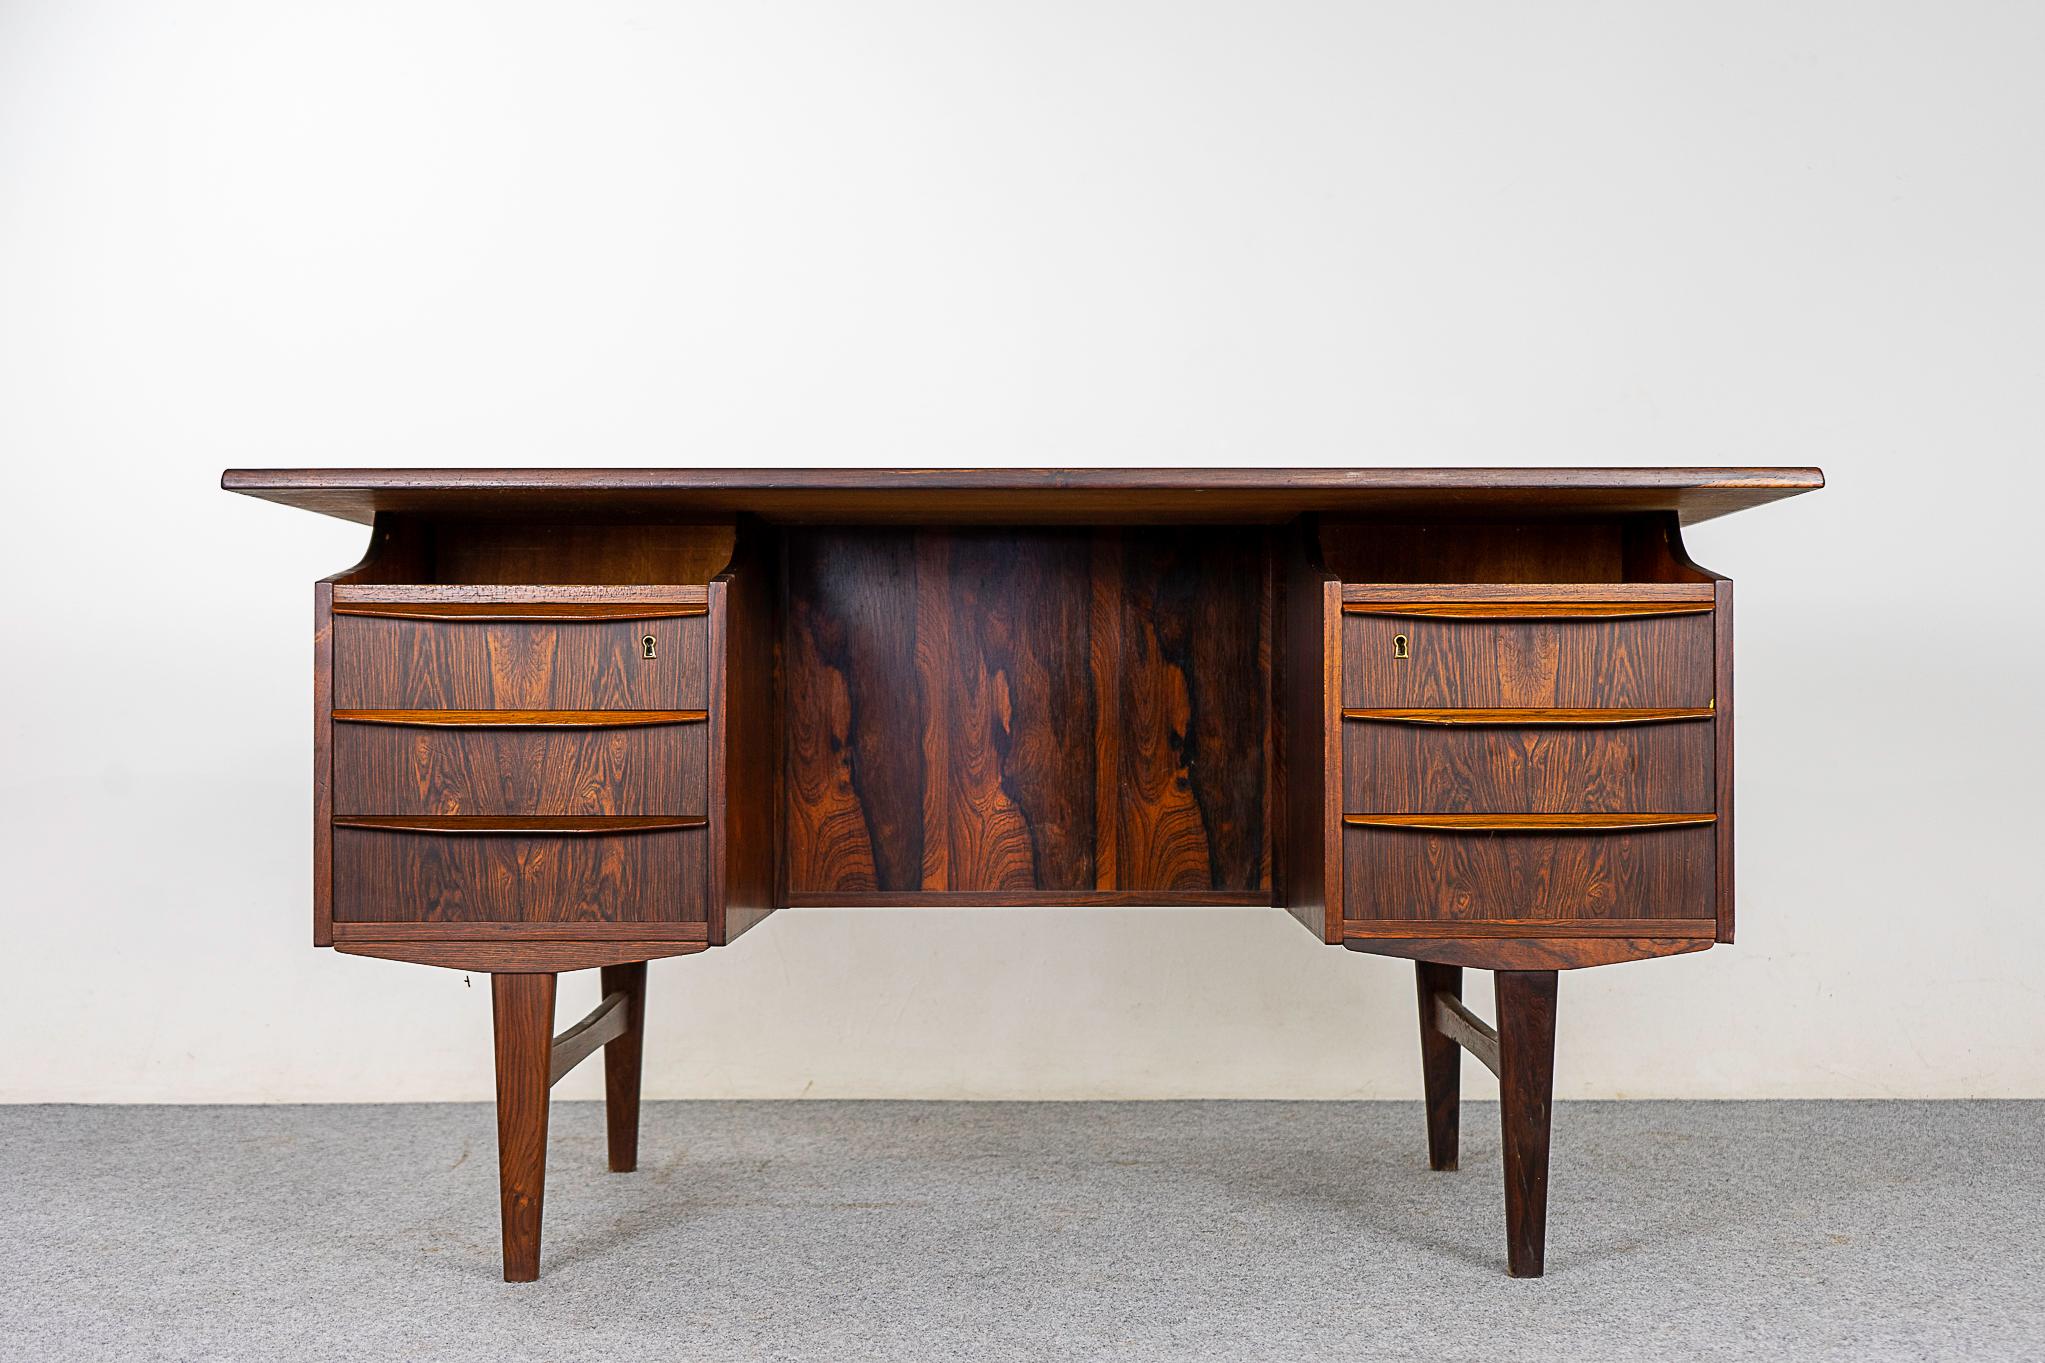 Rosewood Danish writing desk, circa 1960s. Finished on both sides, if centered in your room it will look fantastic from every angle. Hand formed solid wood drawer pulls, floating top, bowtie crossbars and ample storage!

Unrestored item, some marks